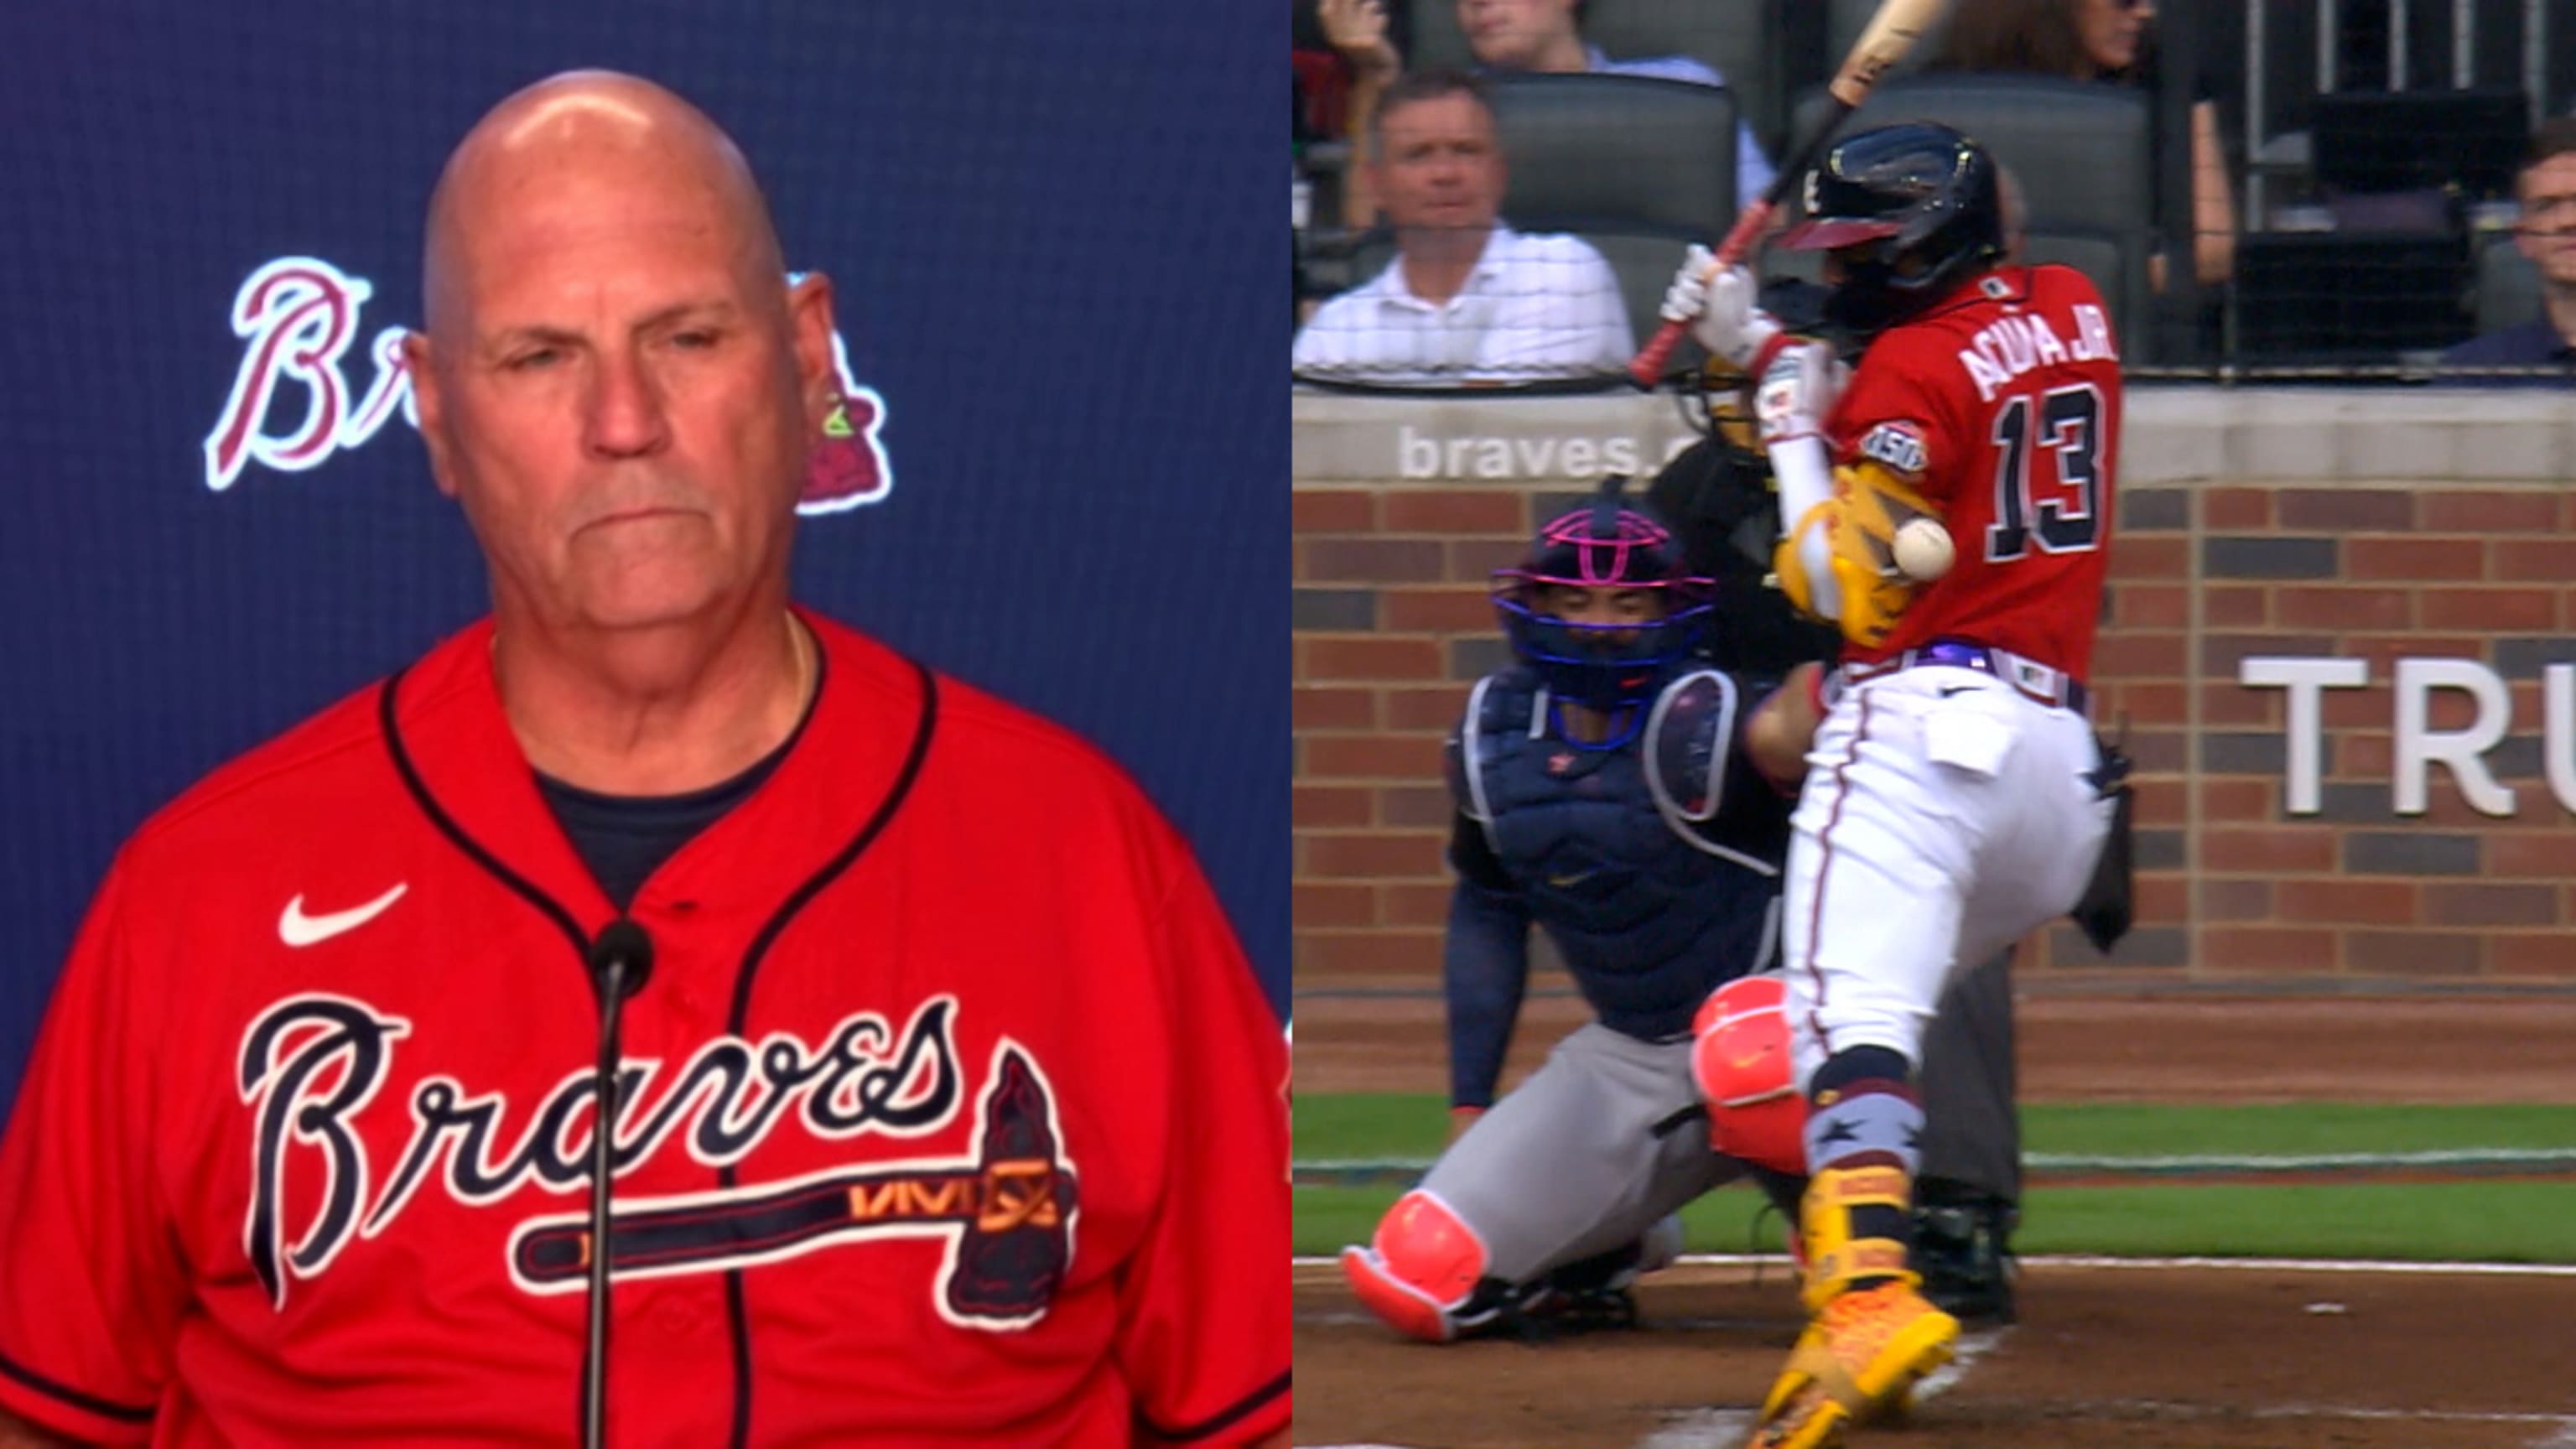 Lopez leads three inductees into Braves' Hall of Fame